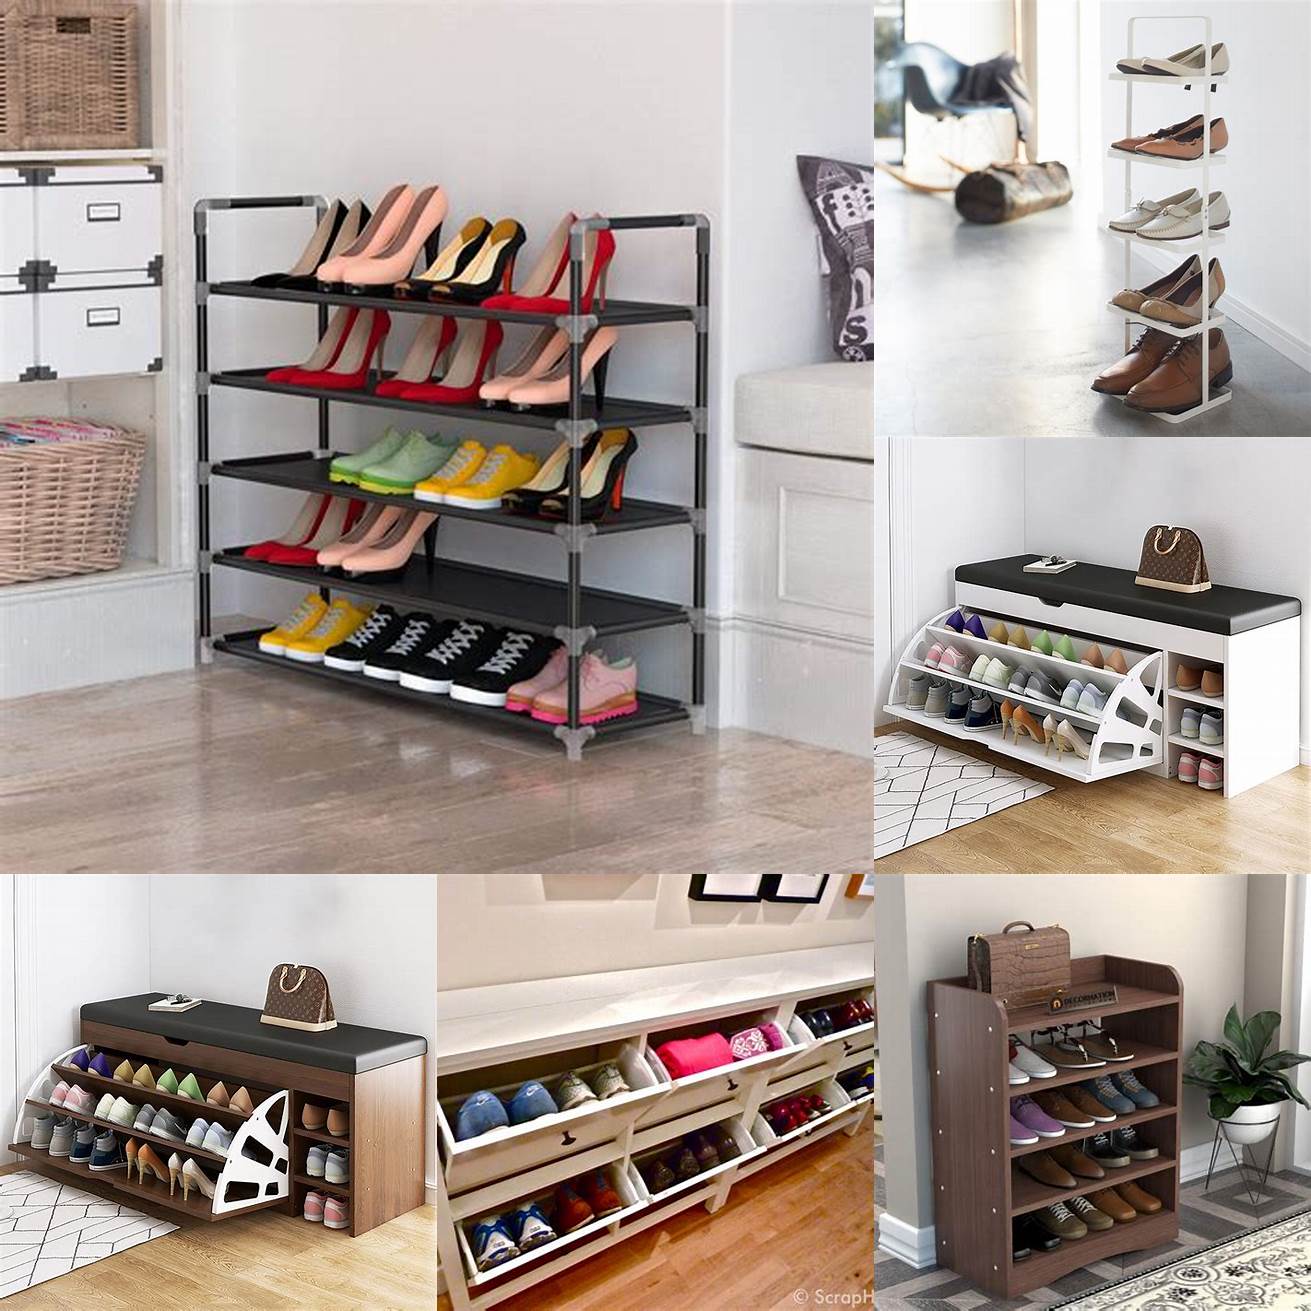 5 Shoe Rack a piece of furniture that is used to store shoes and keep them organized